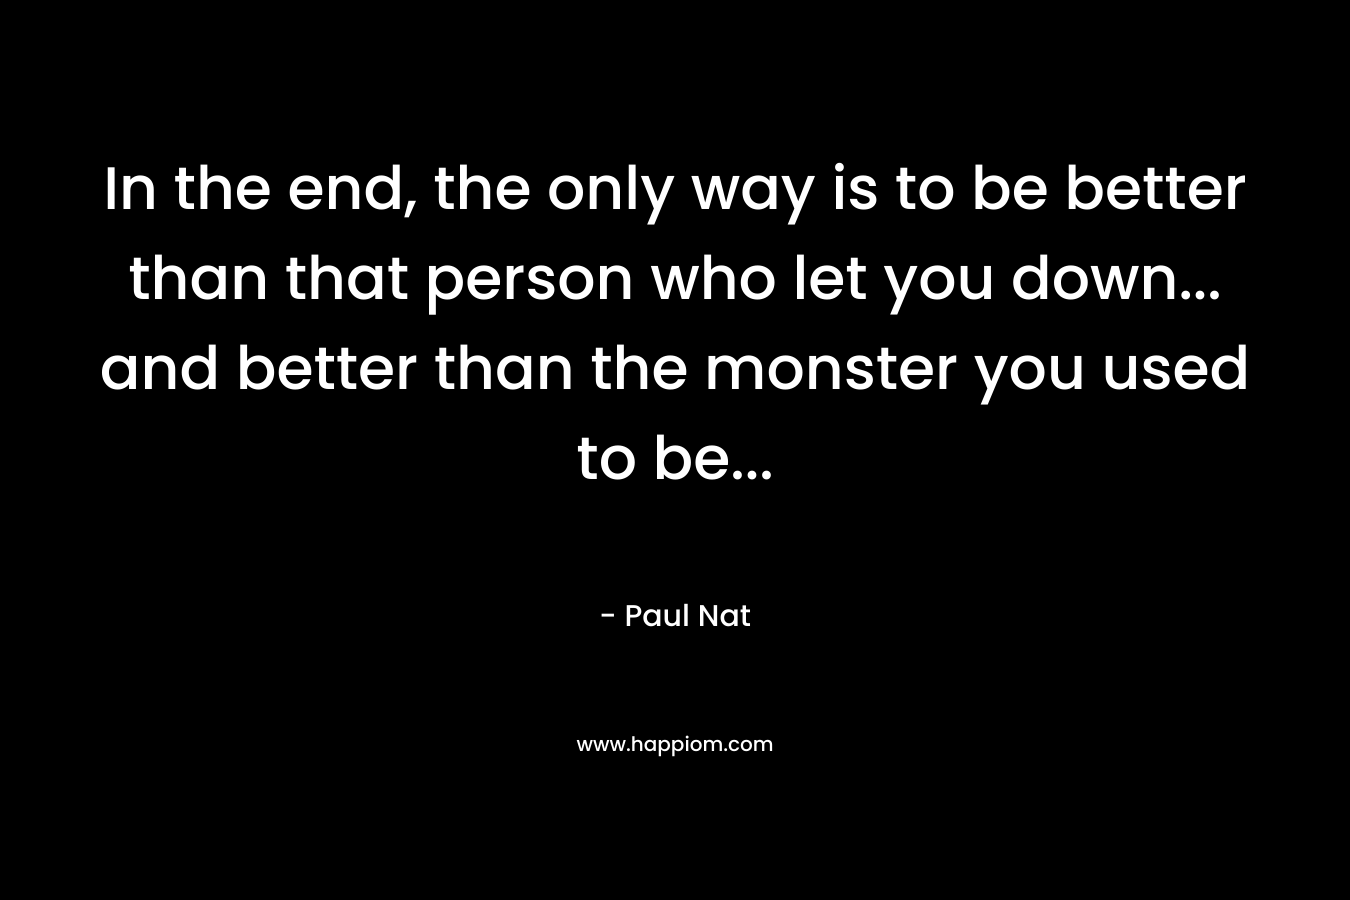 In the end, the only way is to be better than that person who let you down… and better than the monster you used to be… – Paul Nat